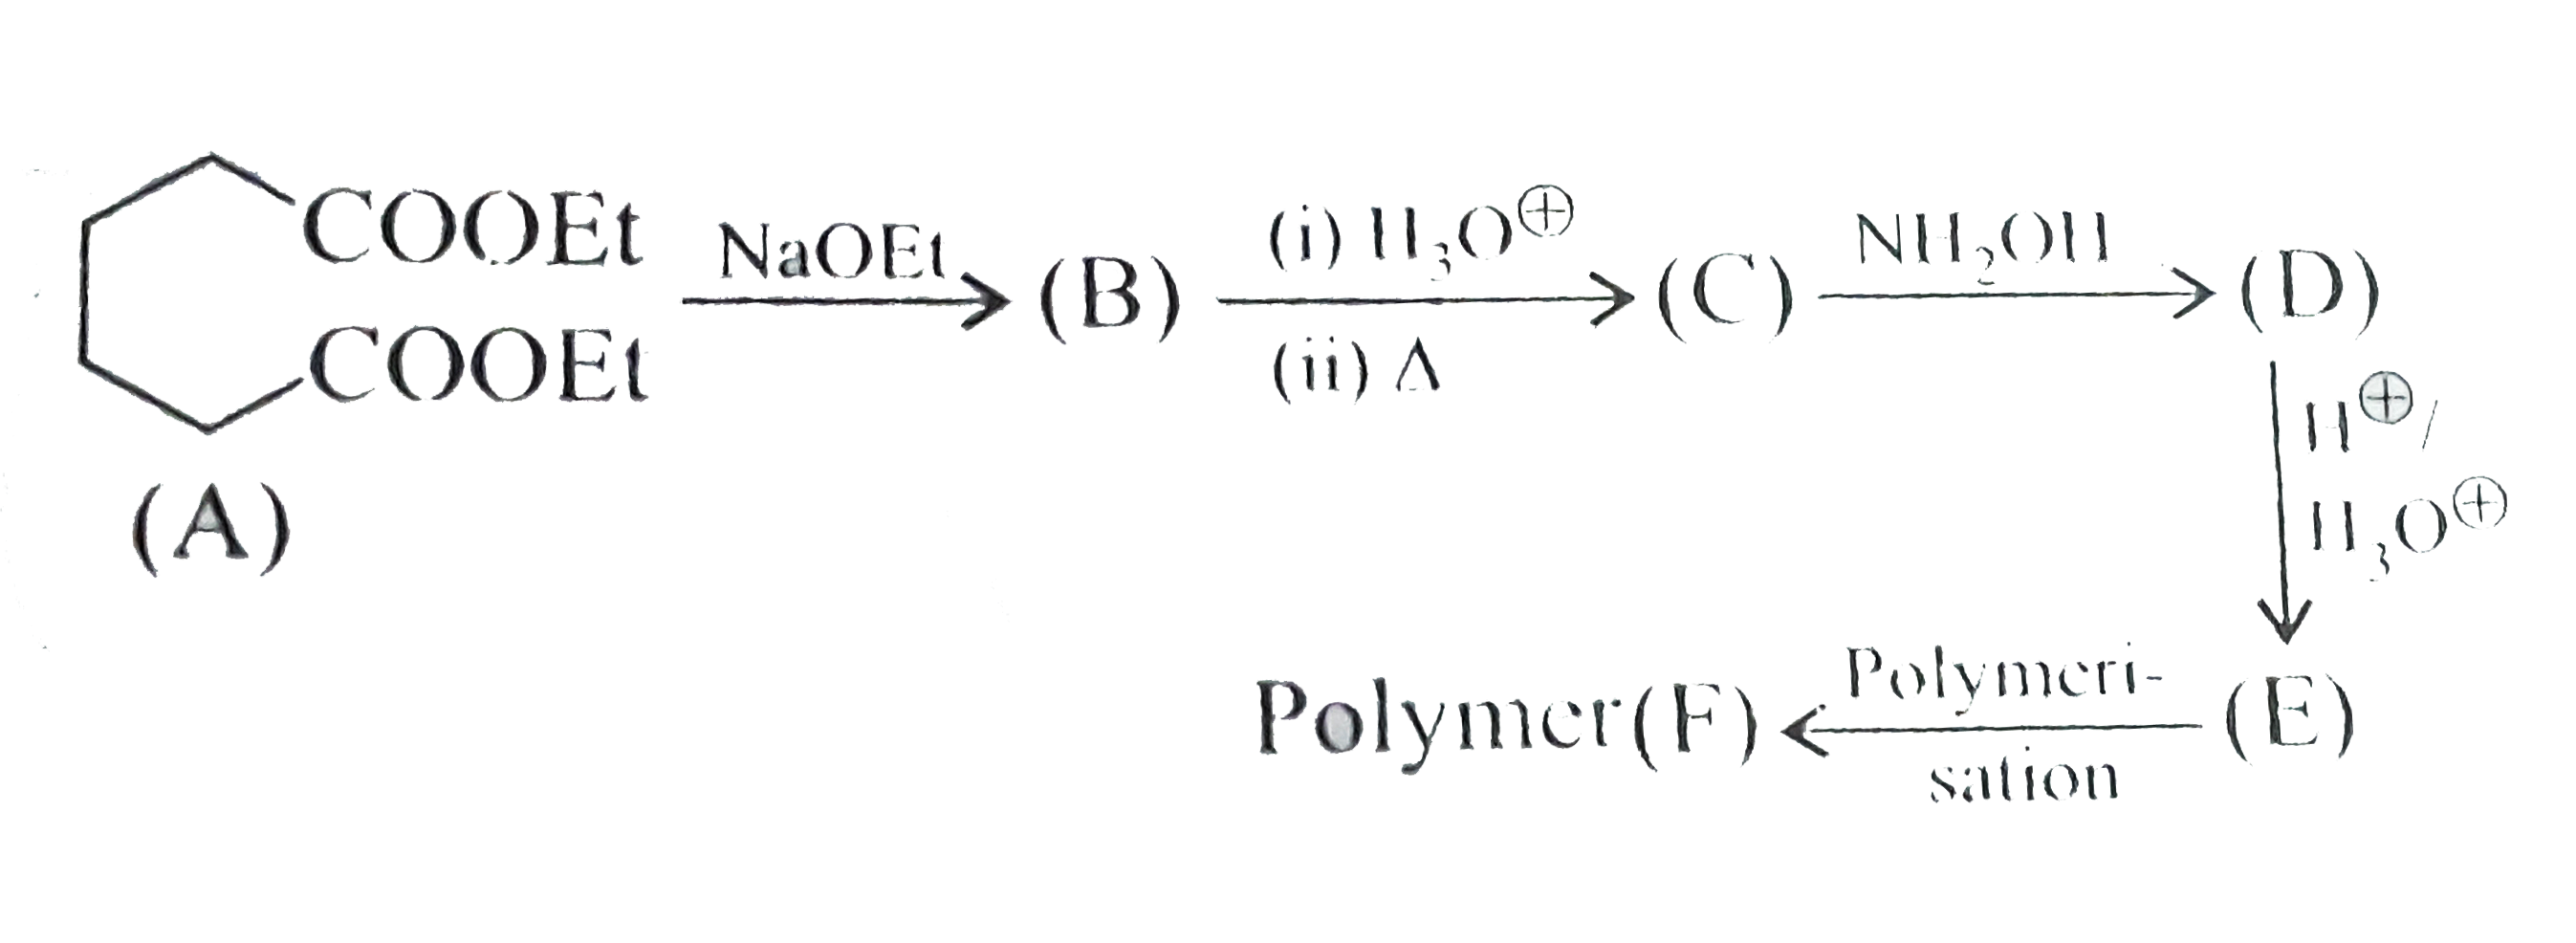 Which of the following groups does the polymer(F)contain?